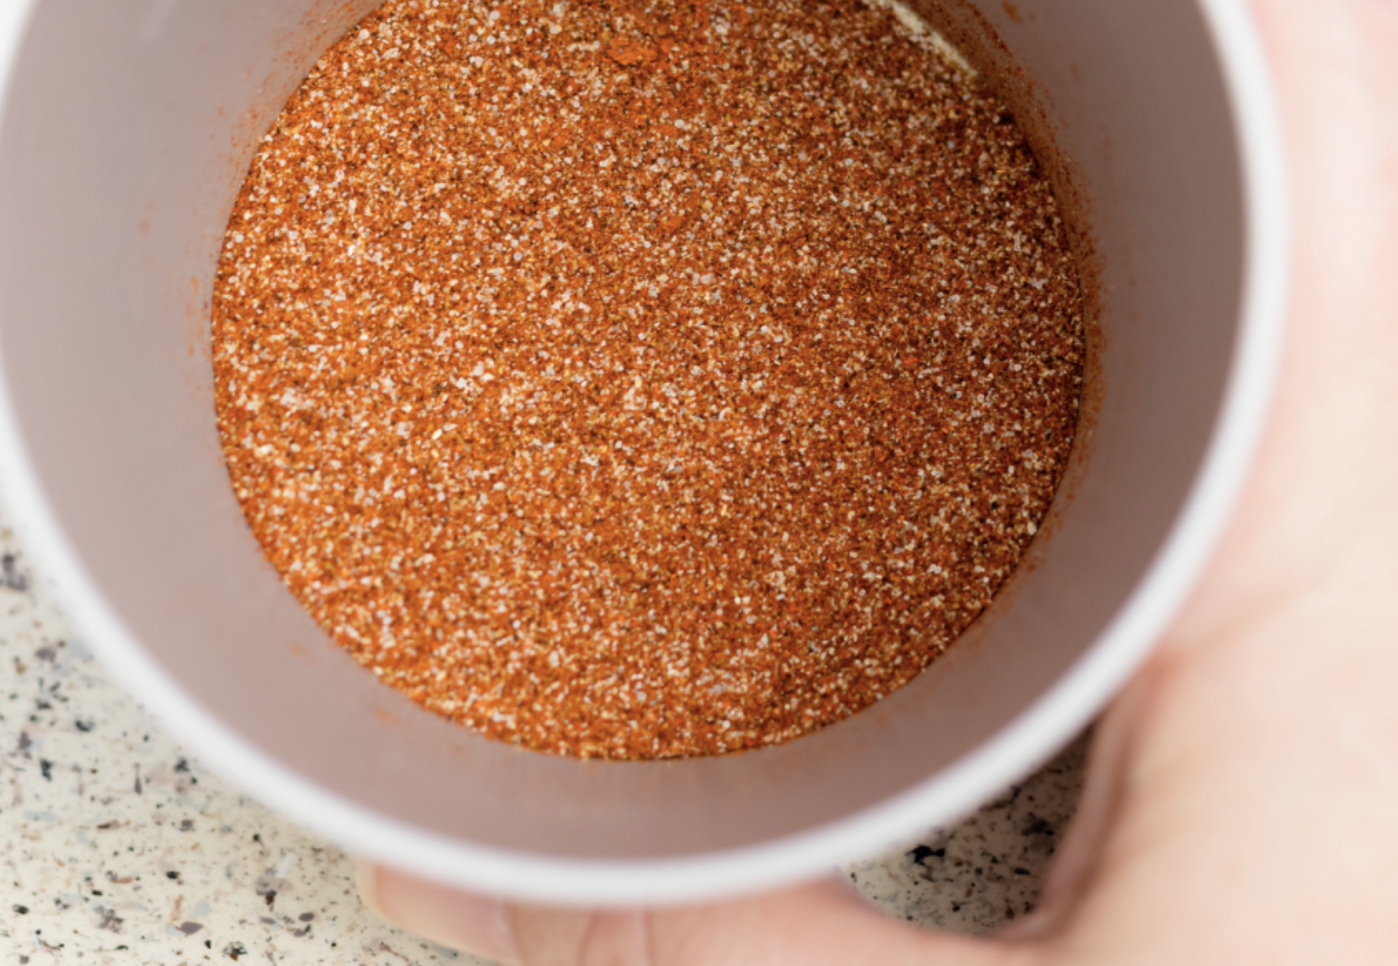 From Scratch to Savory: Homemade Mild Taco Seasoning